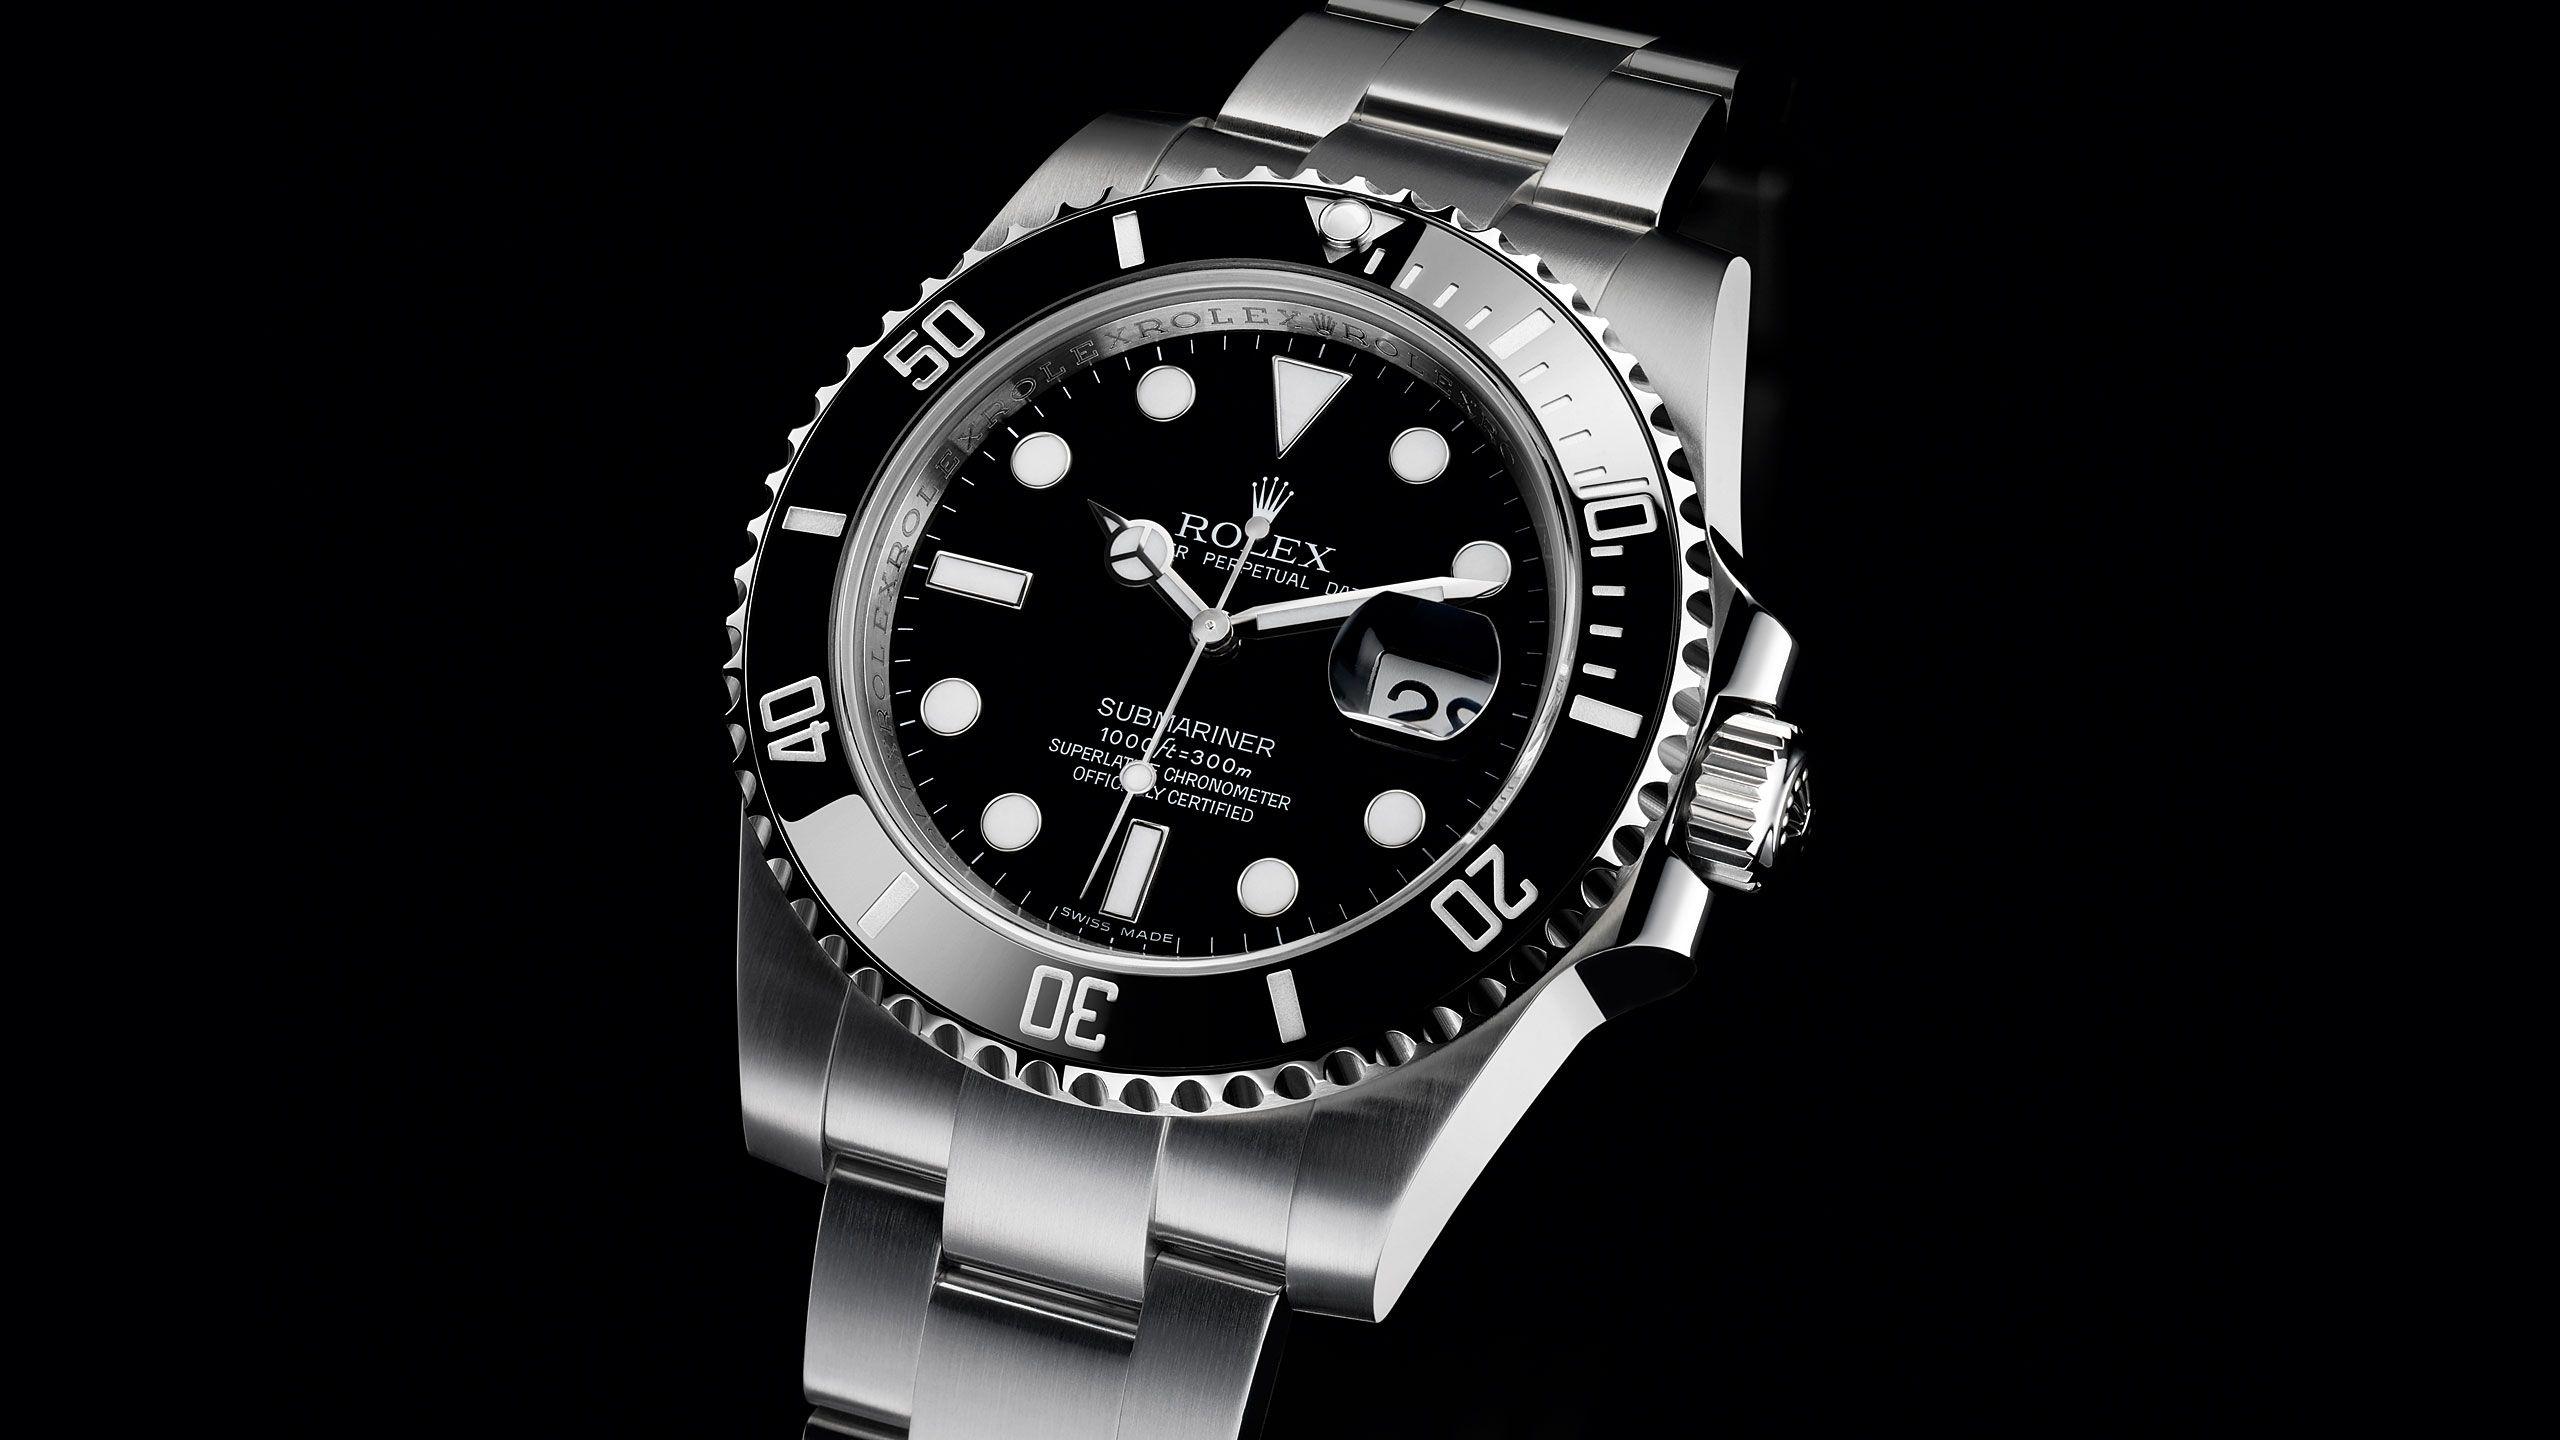 Wallpaper Rolex, Submariner Watches, Classic, Quality